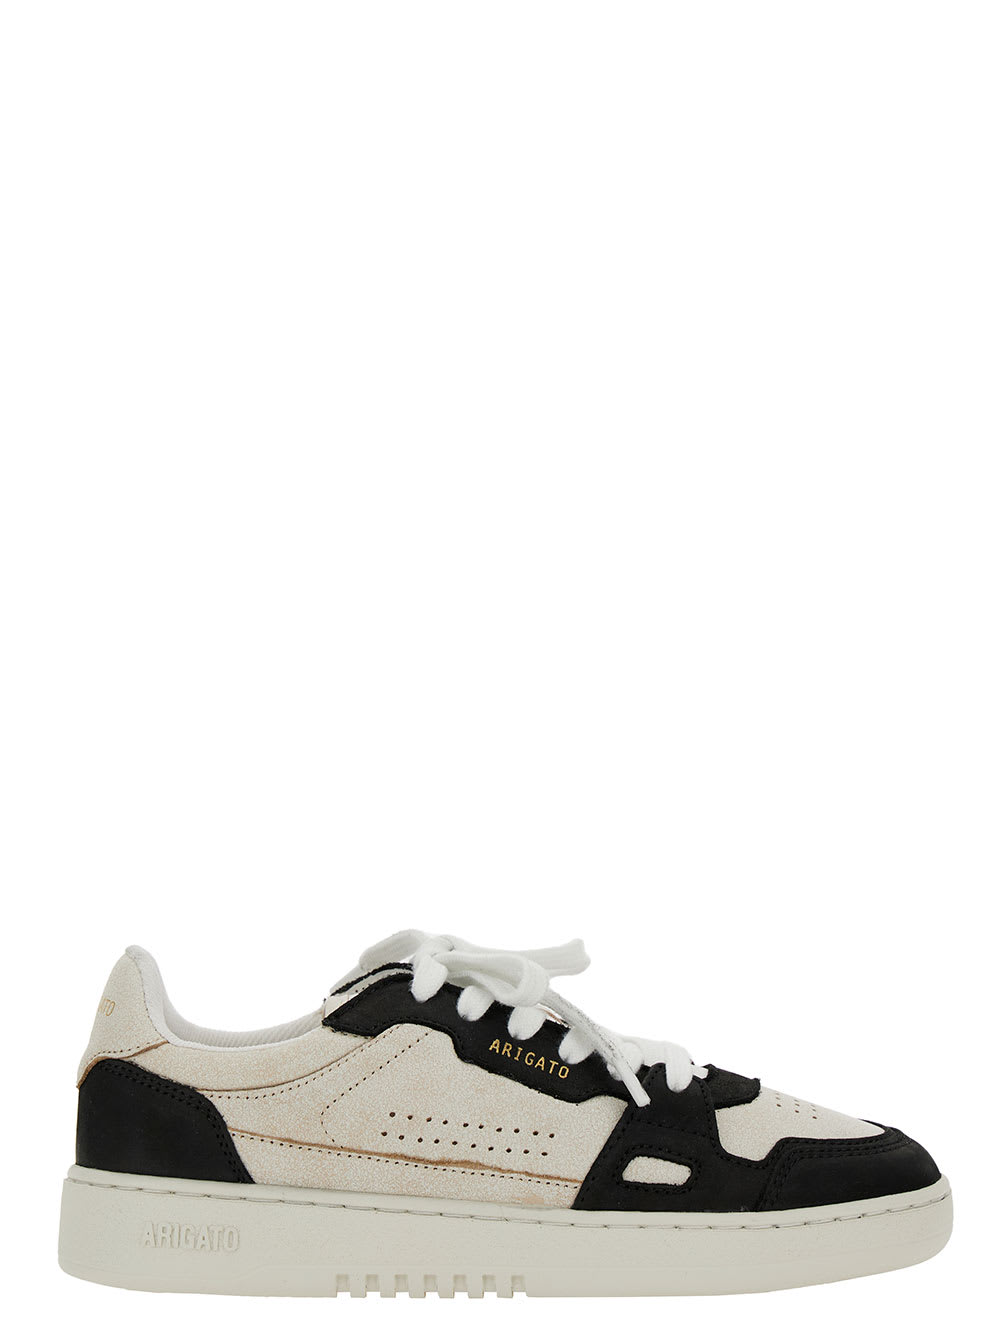 AXEL ARIGATO DICE LOW BLACK AND WHITE LOW TOP SNEAKERS WITH EMBOSSED LOGO AND VINTAGE EFFECT IN LEATHER WOMAN